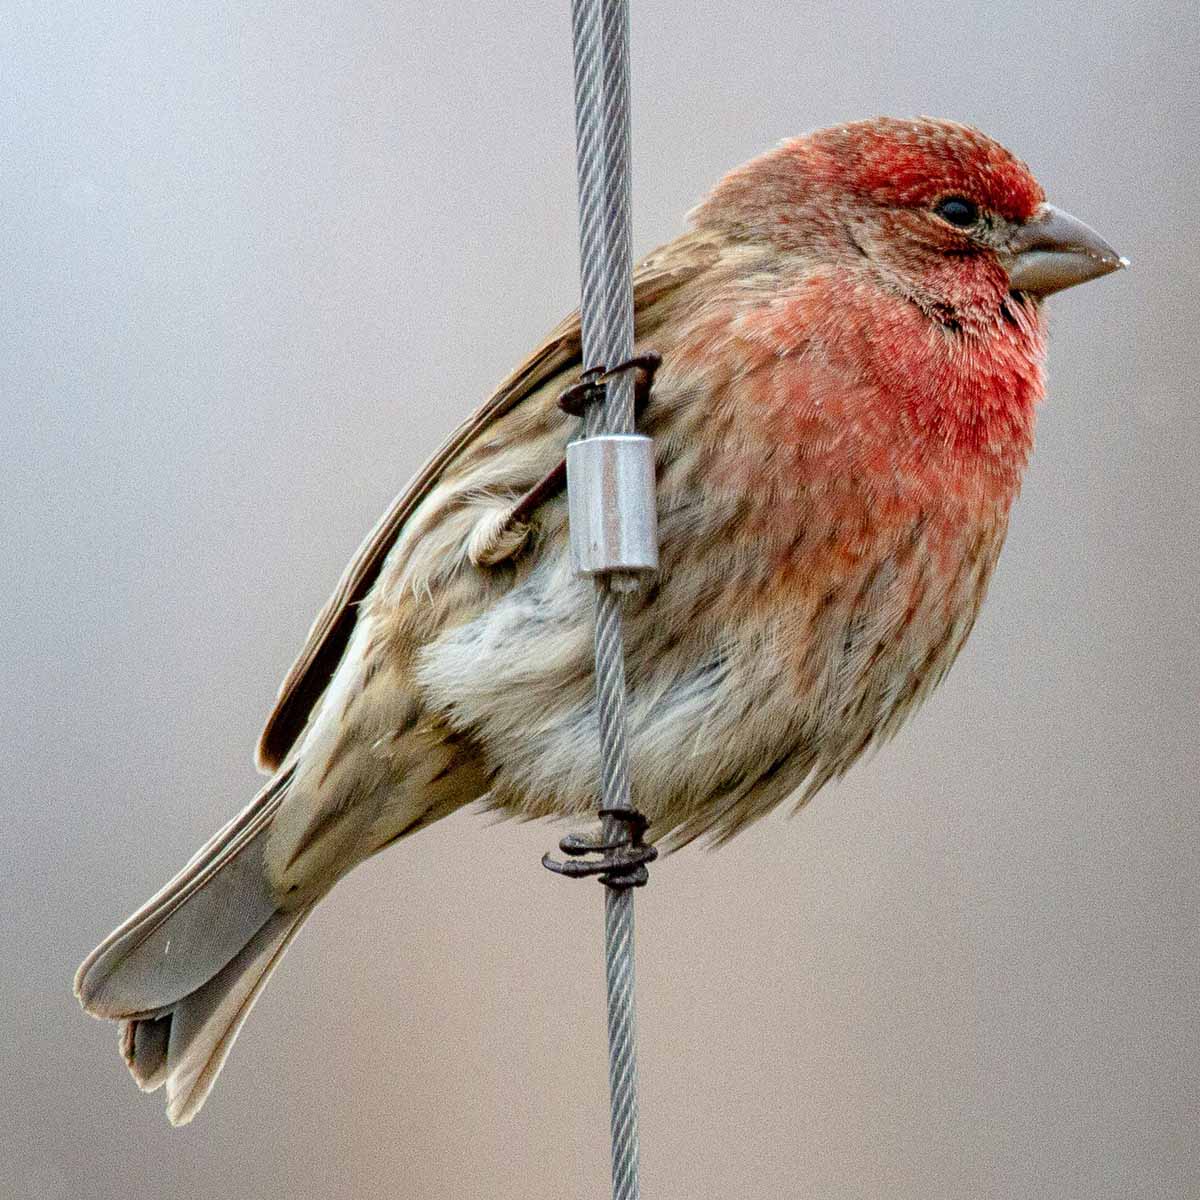 The image shows an upright house finch clinging with both claws to a metallic cable at an 45-degree angle. The finch has a compact, rounded body with a micro, conical beak. Its plumage is a mix of brown, gray, and reddish-pink feathers, with the male's head and breast displaying the distinctive red coloration as it fades into the darker neutrals. The bird's feet are firmly gripping the cable, allowing it to hang at an unusual diagonal angle. The metallic cable stands out against the blurred, out-of-focus background, drawing the viewer's attention to the finch's unique perching position. House finches are known for their adaptability and ability to thrive in urban and suburban environments, often taking advantage of man-made structures like this cable for roosting and foraging.